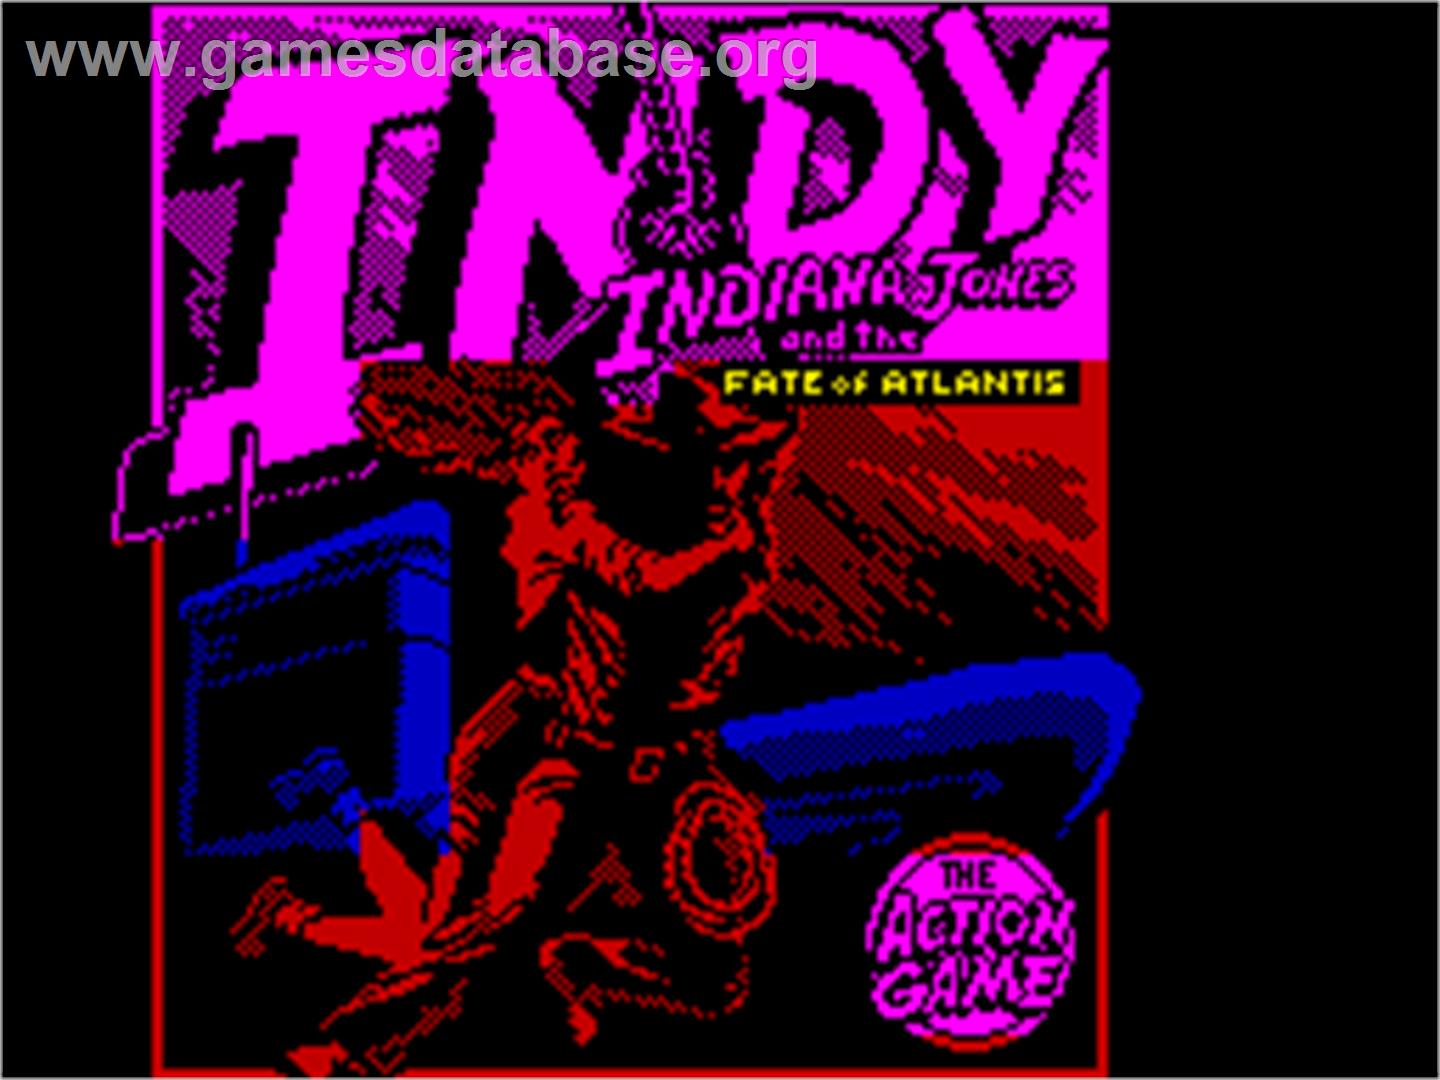 Indiana Jones and The Fate of Atlantis: The Action Game - Sinclair ZX Spectrum - Artwork - Title Screen